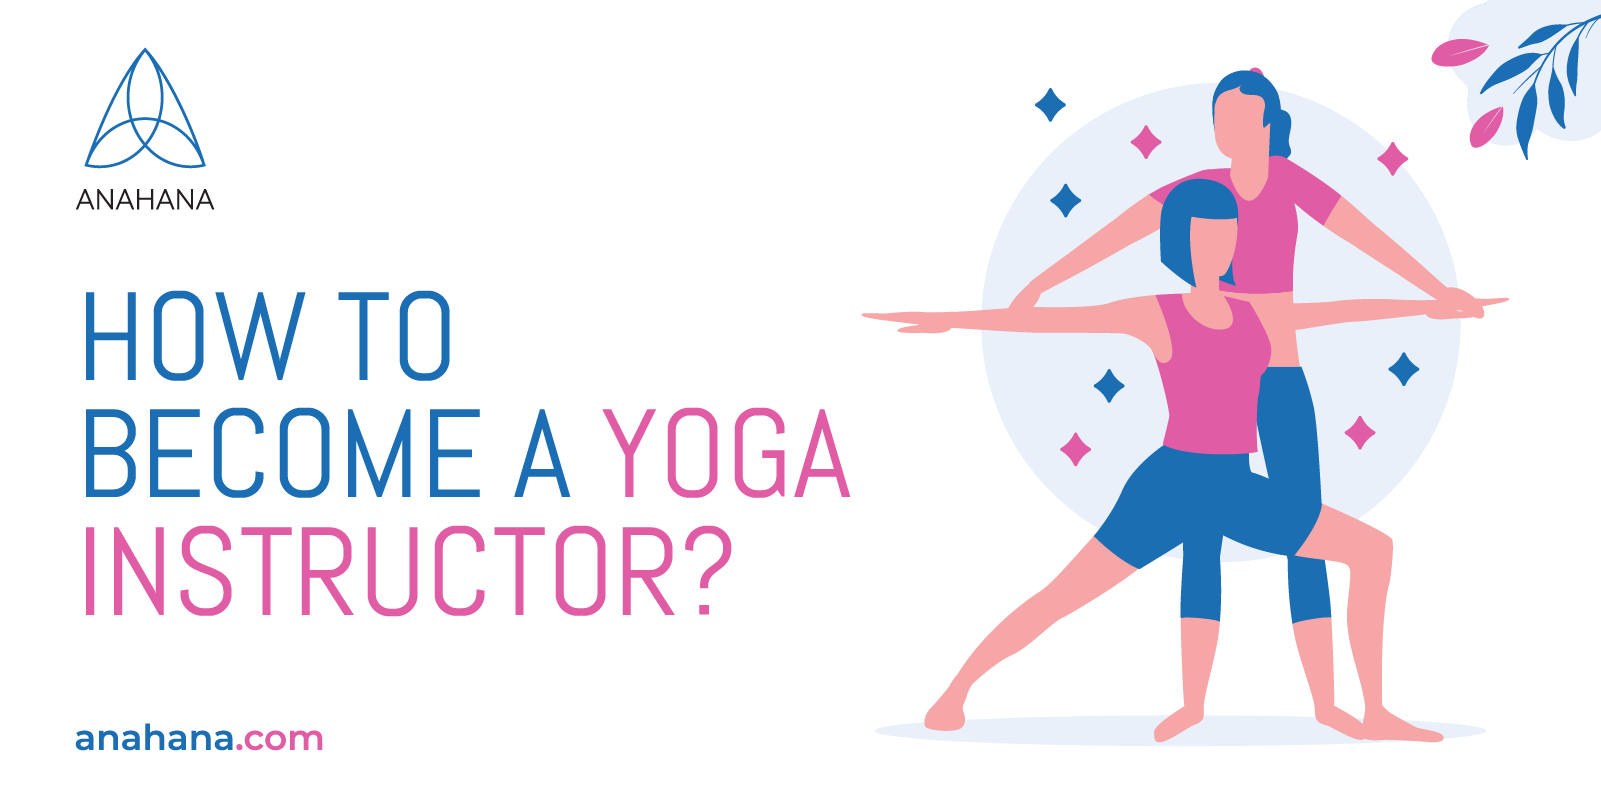 What Are the Qualifications to Be a Yoga Teacher?